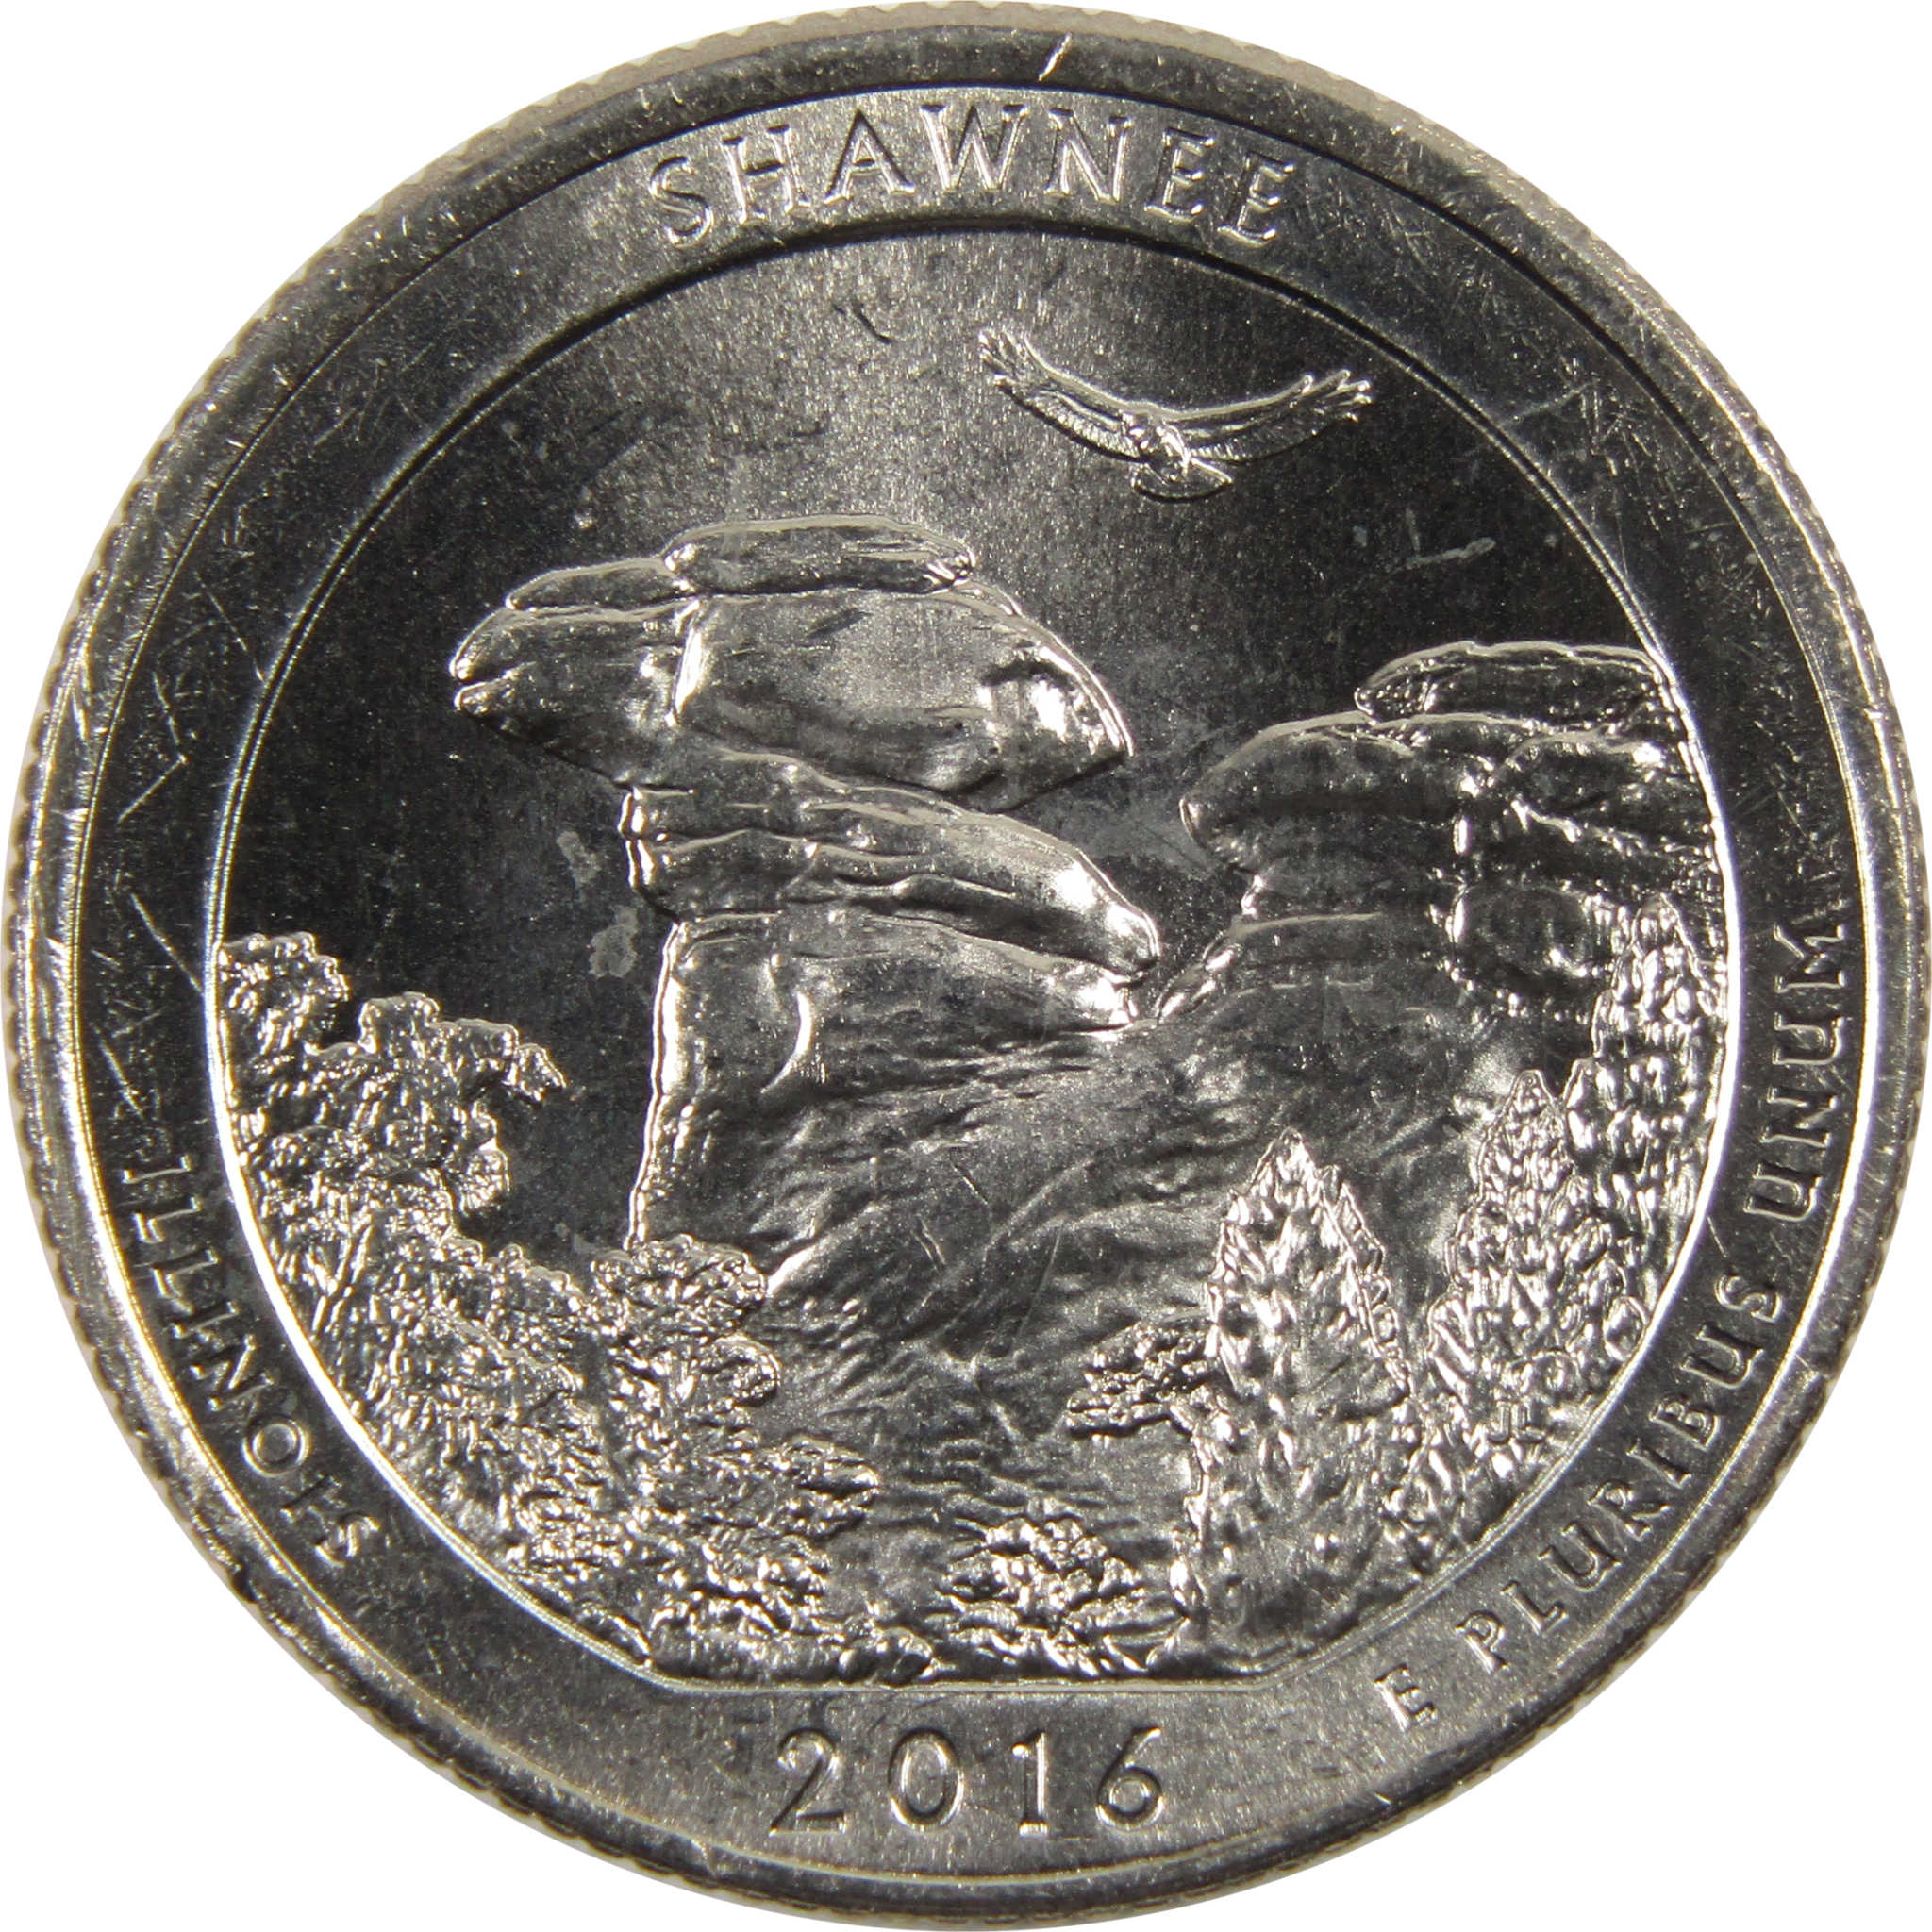 2016 P Shawnee National Forest Quarter BU Uncirculated Clad 25c Coin